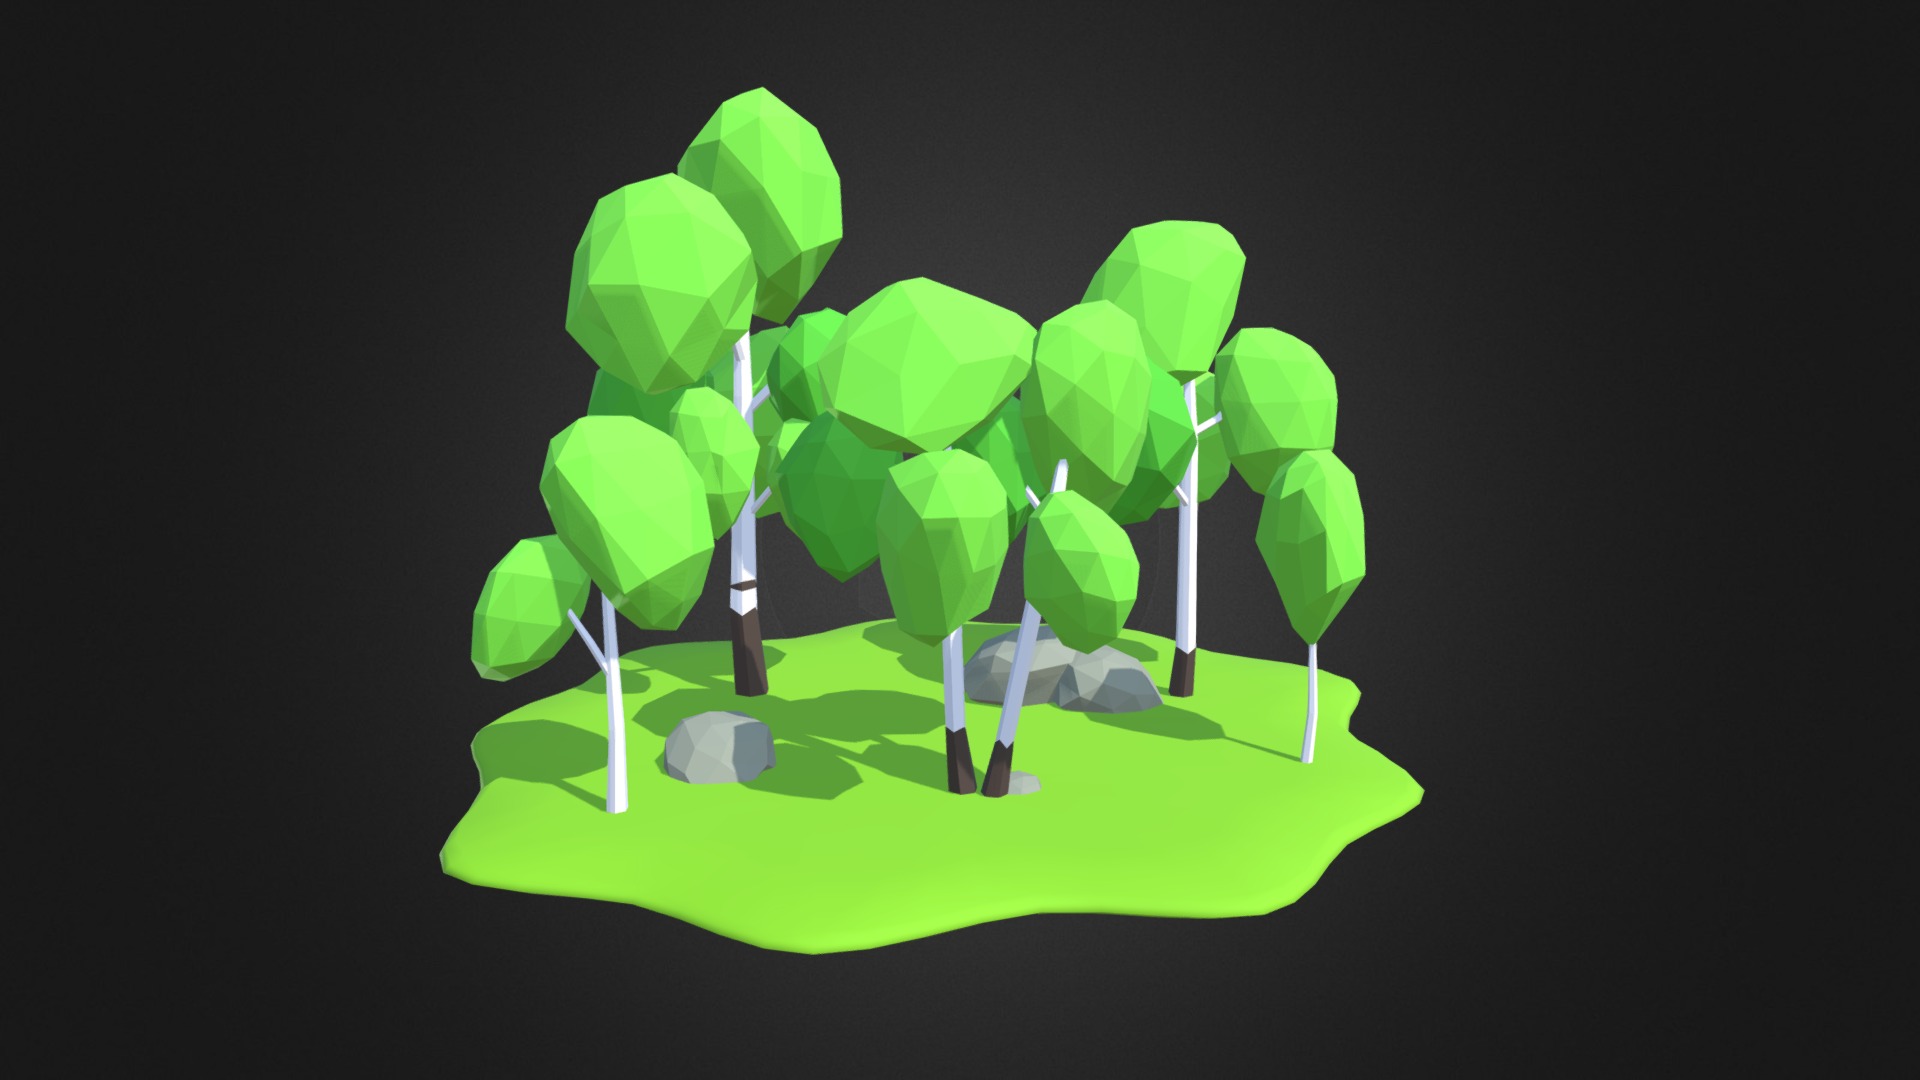 3D model Birch island lowpoly - This is a 3D model of the Birch island lowpoly. The 3D model is about a green leafy plant.